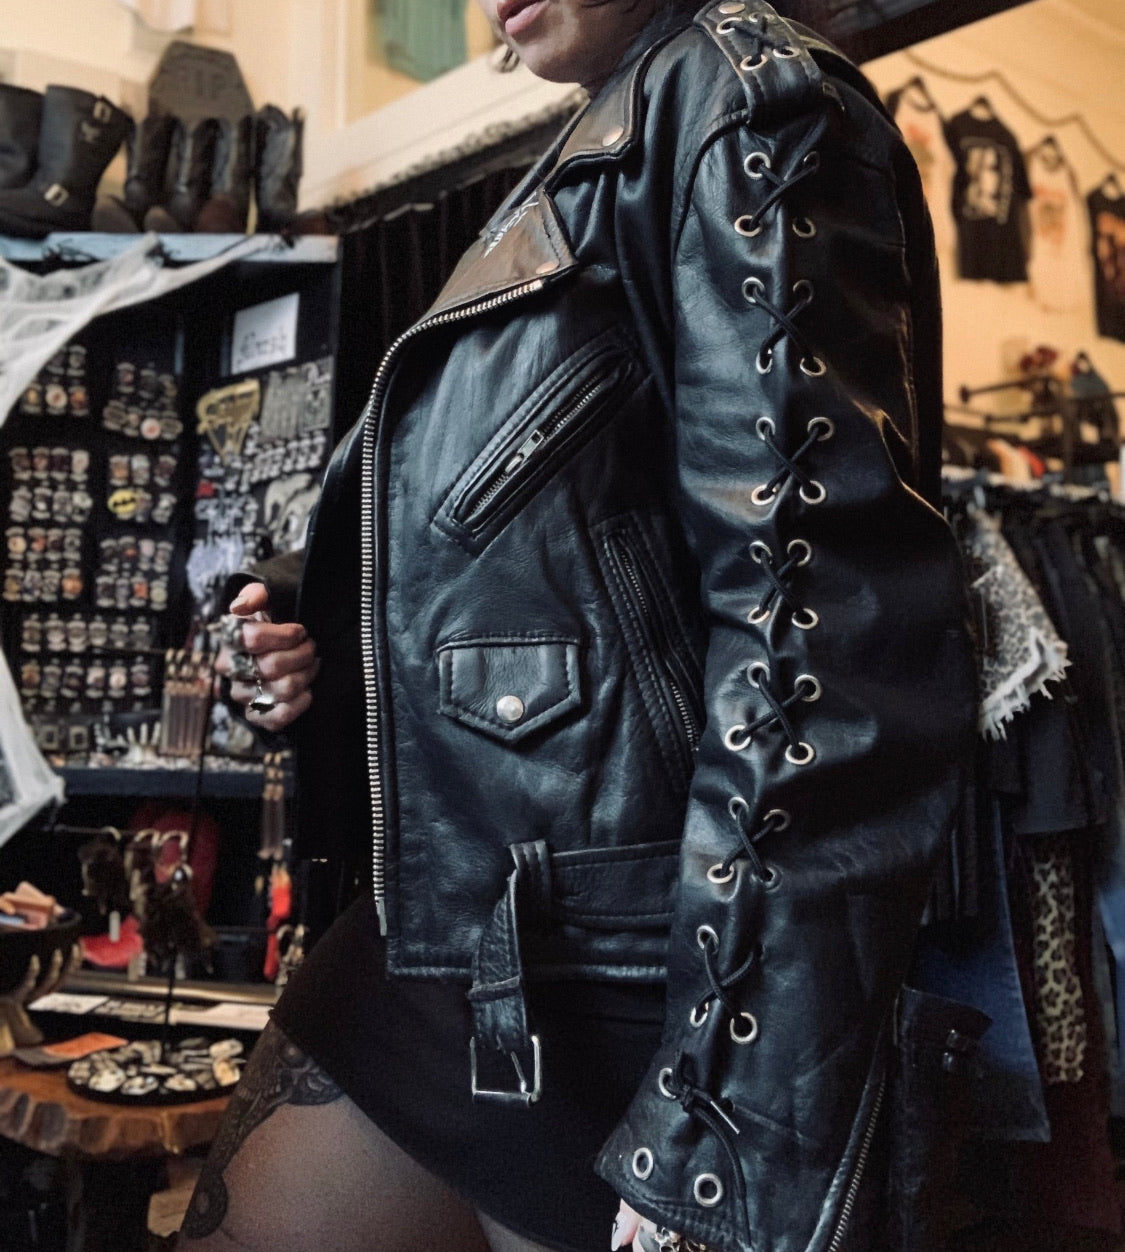 Ultimate Ultra Heavy Metal Corset Lace-Up Motorcycle Jacket